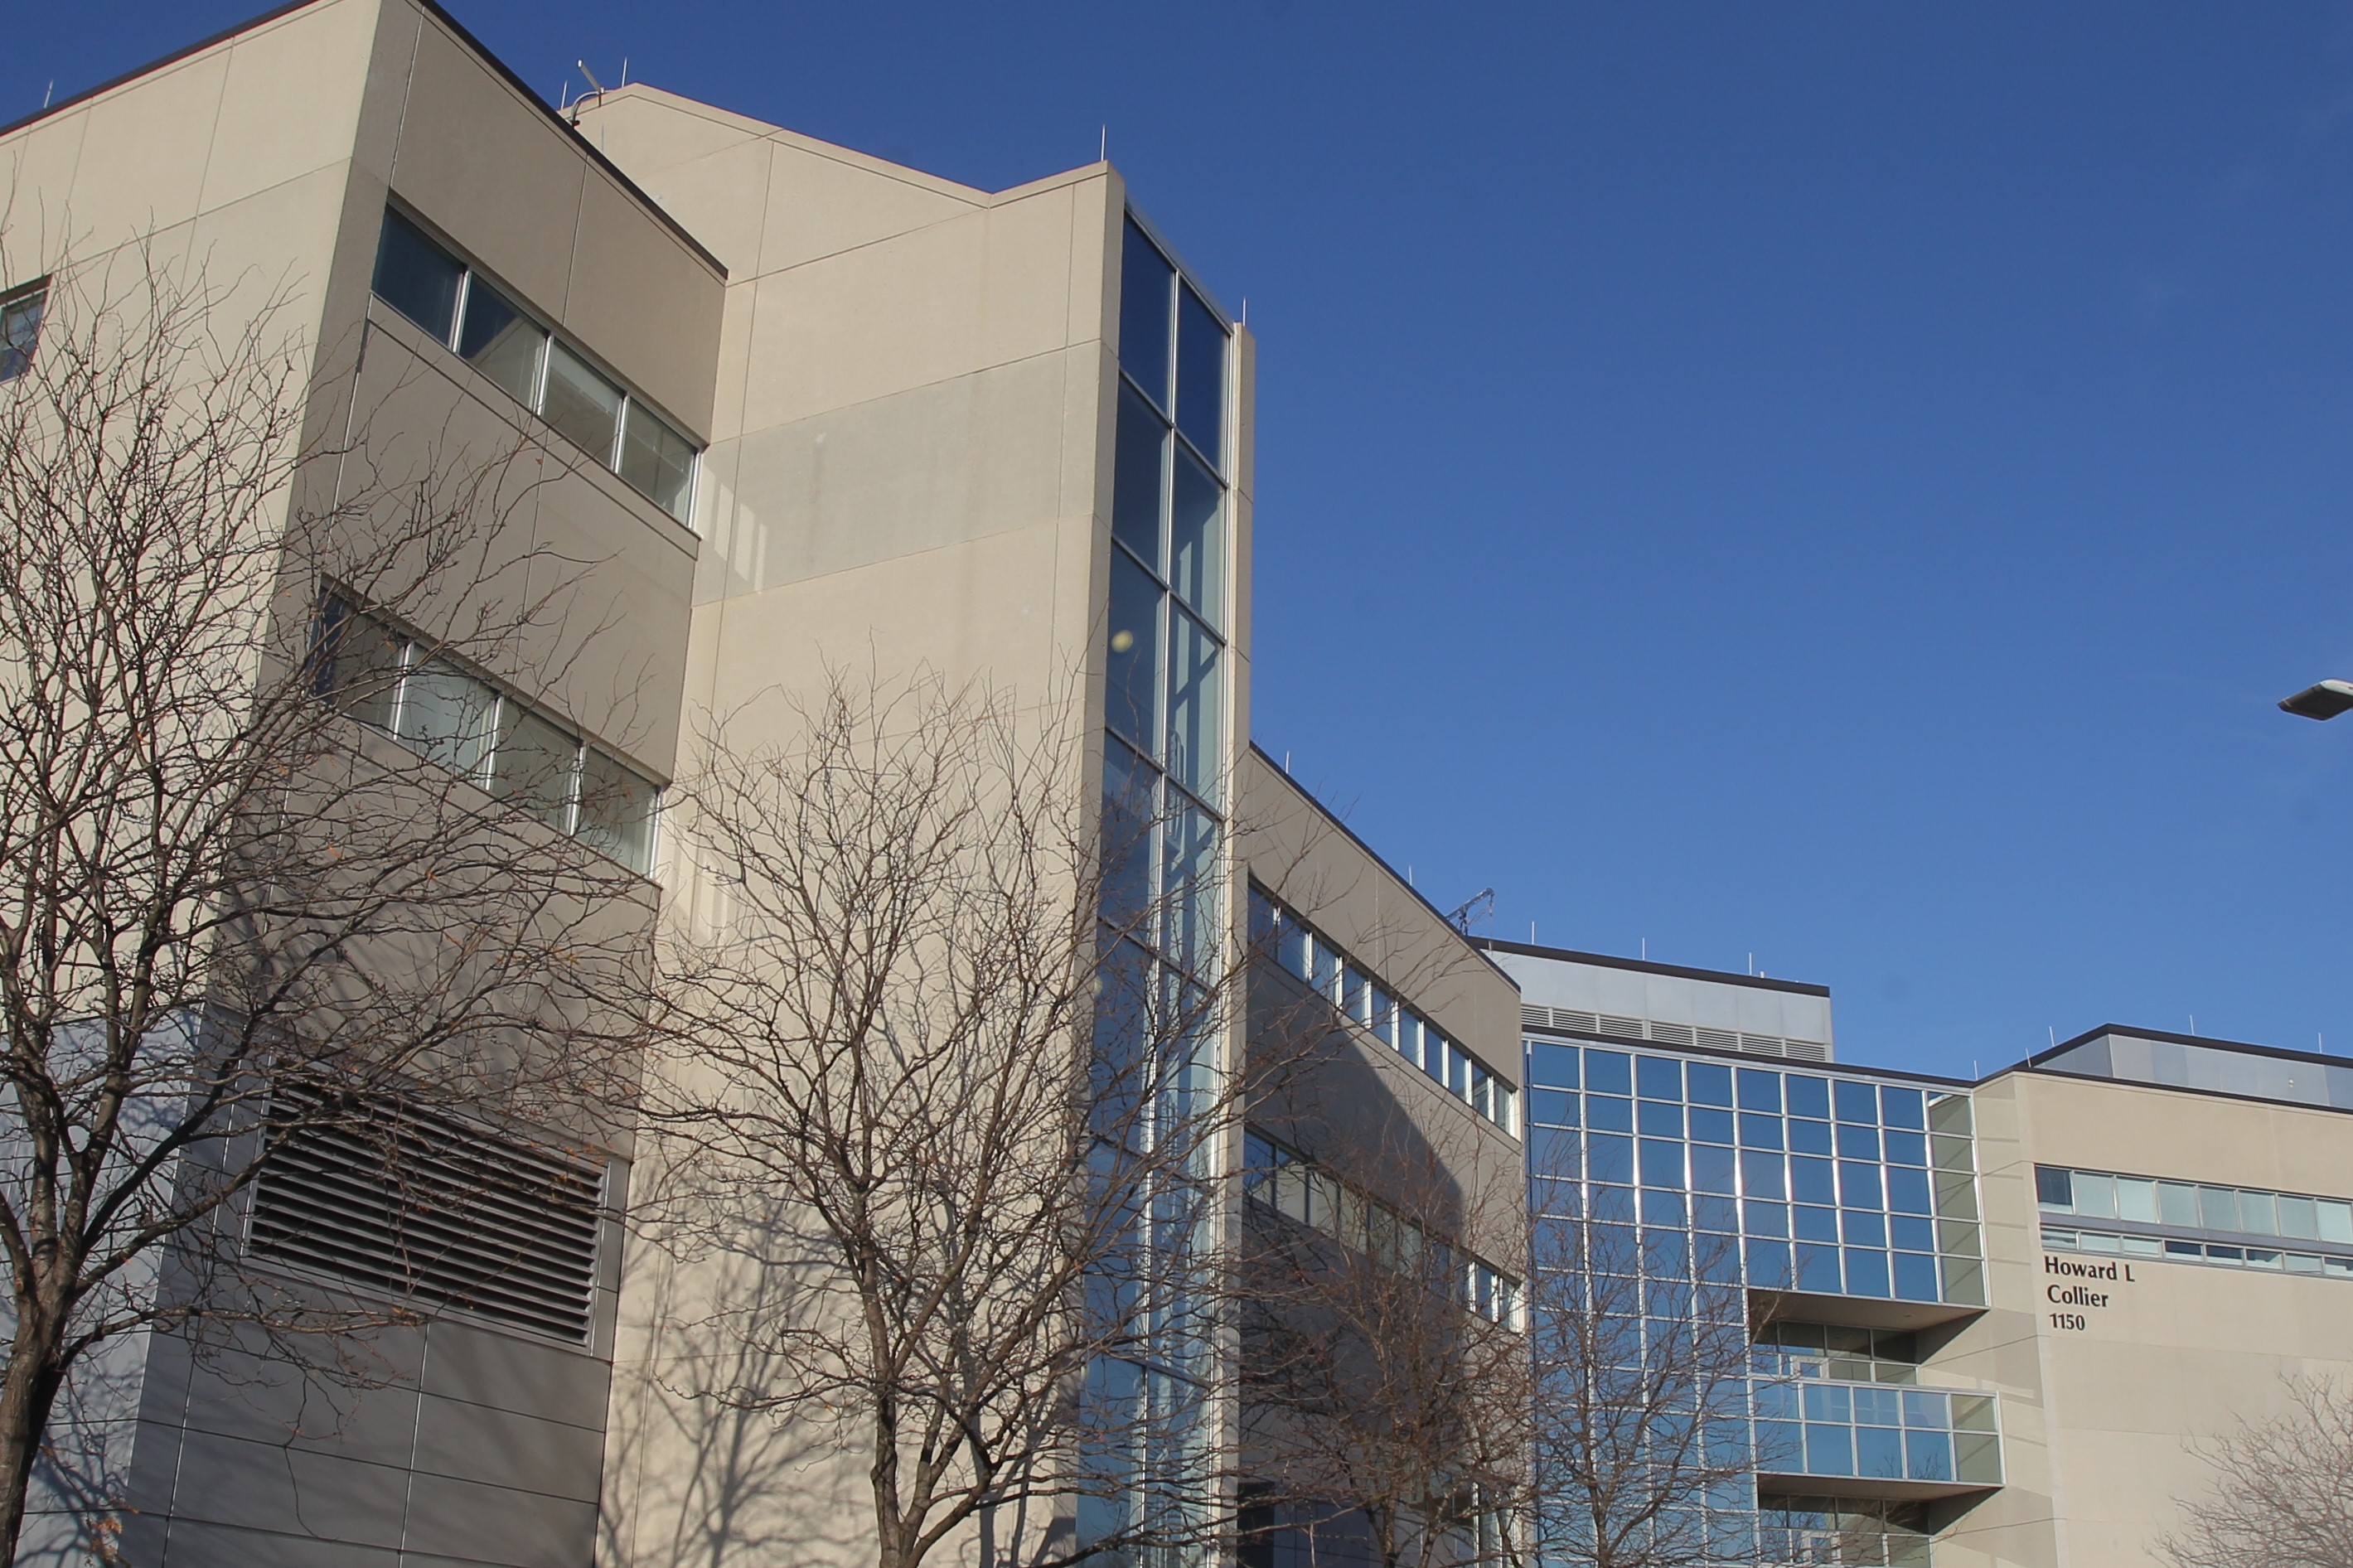 Colllier Building on Health Science Campus